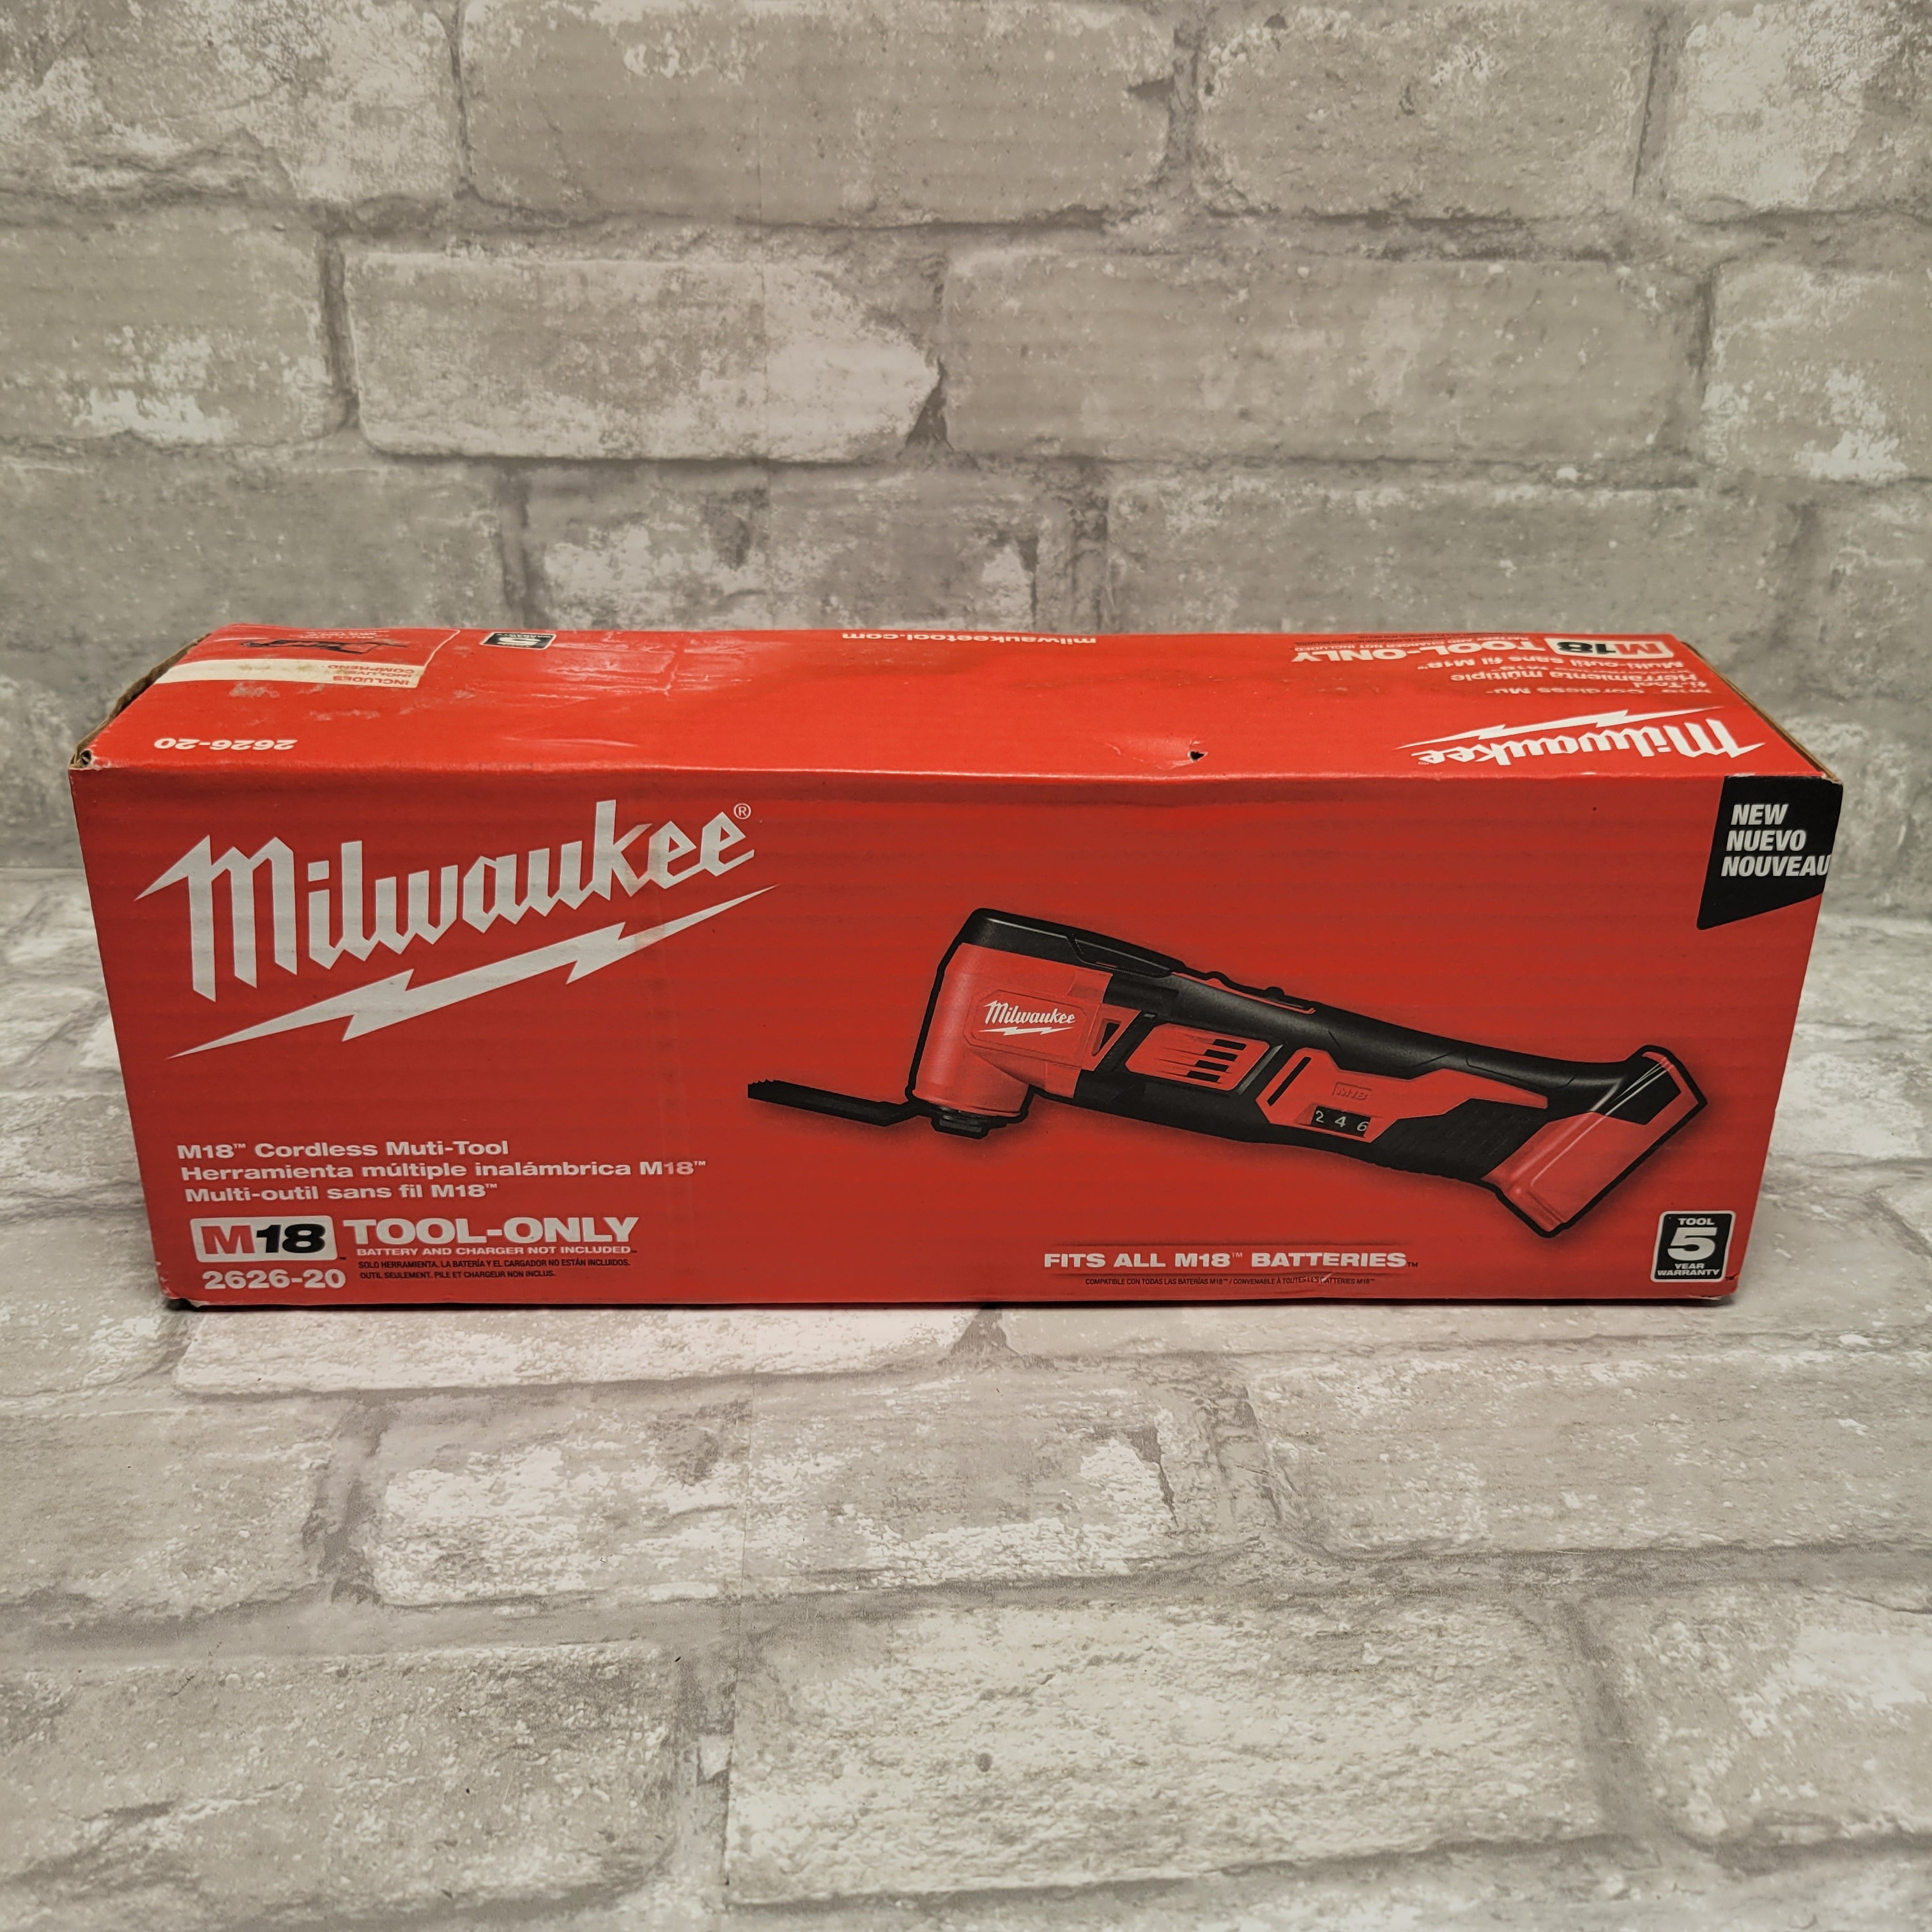 Milwaukee M18 18V Lithium-Ion Cordless Oscillating Multi-Tool (Tool-Only) 2626-20 (7975206551790)